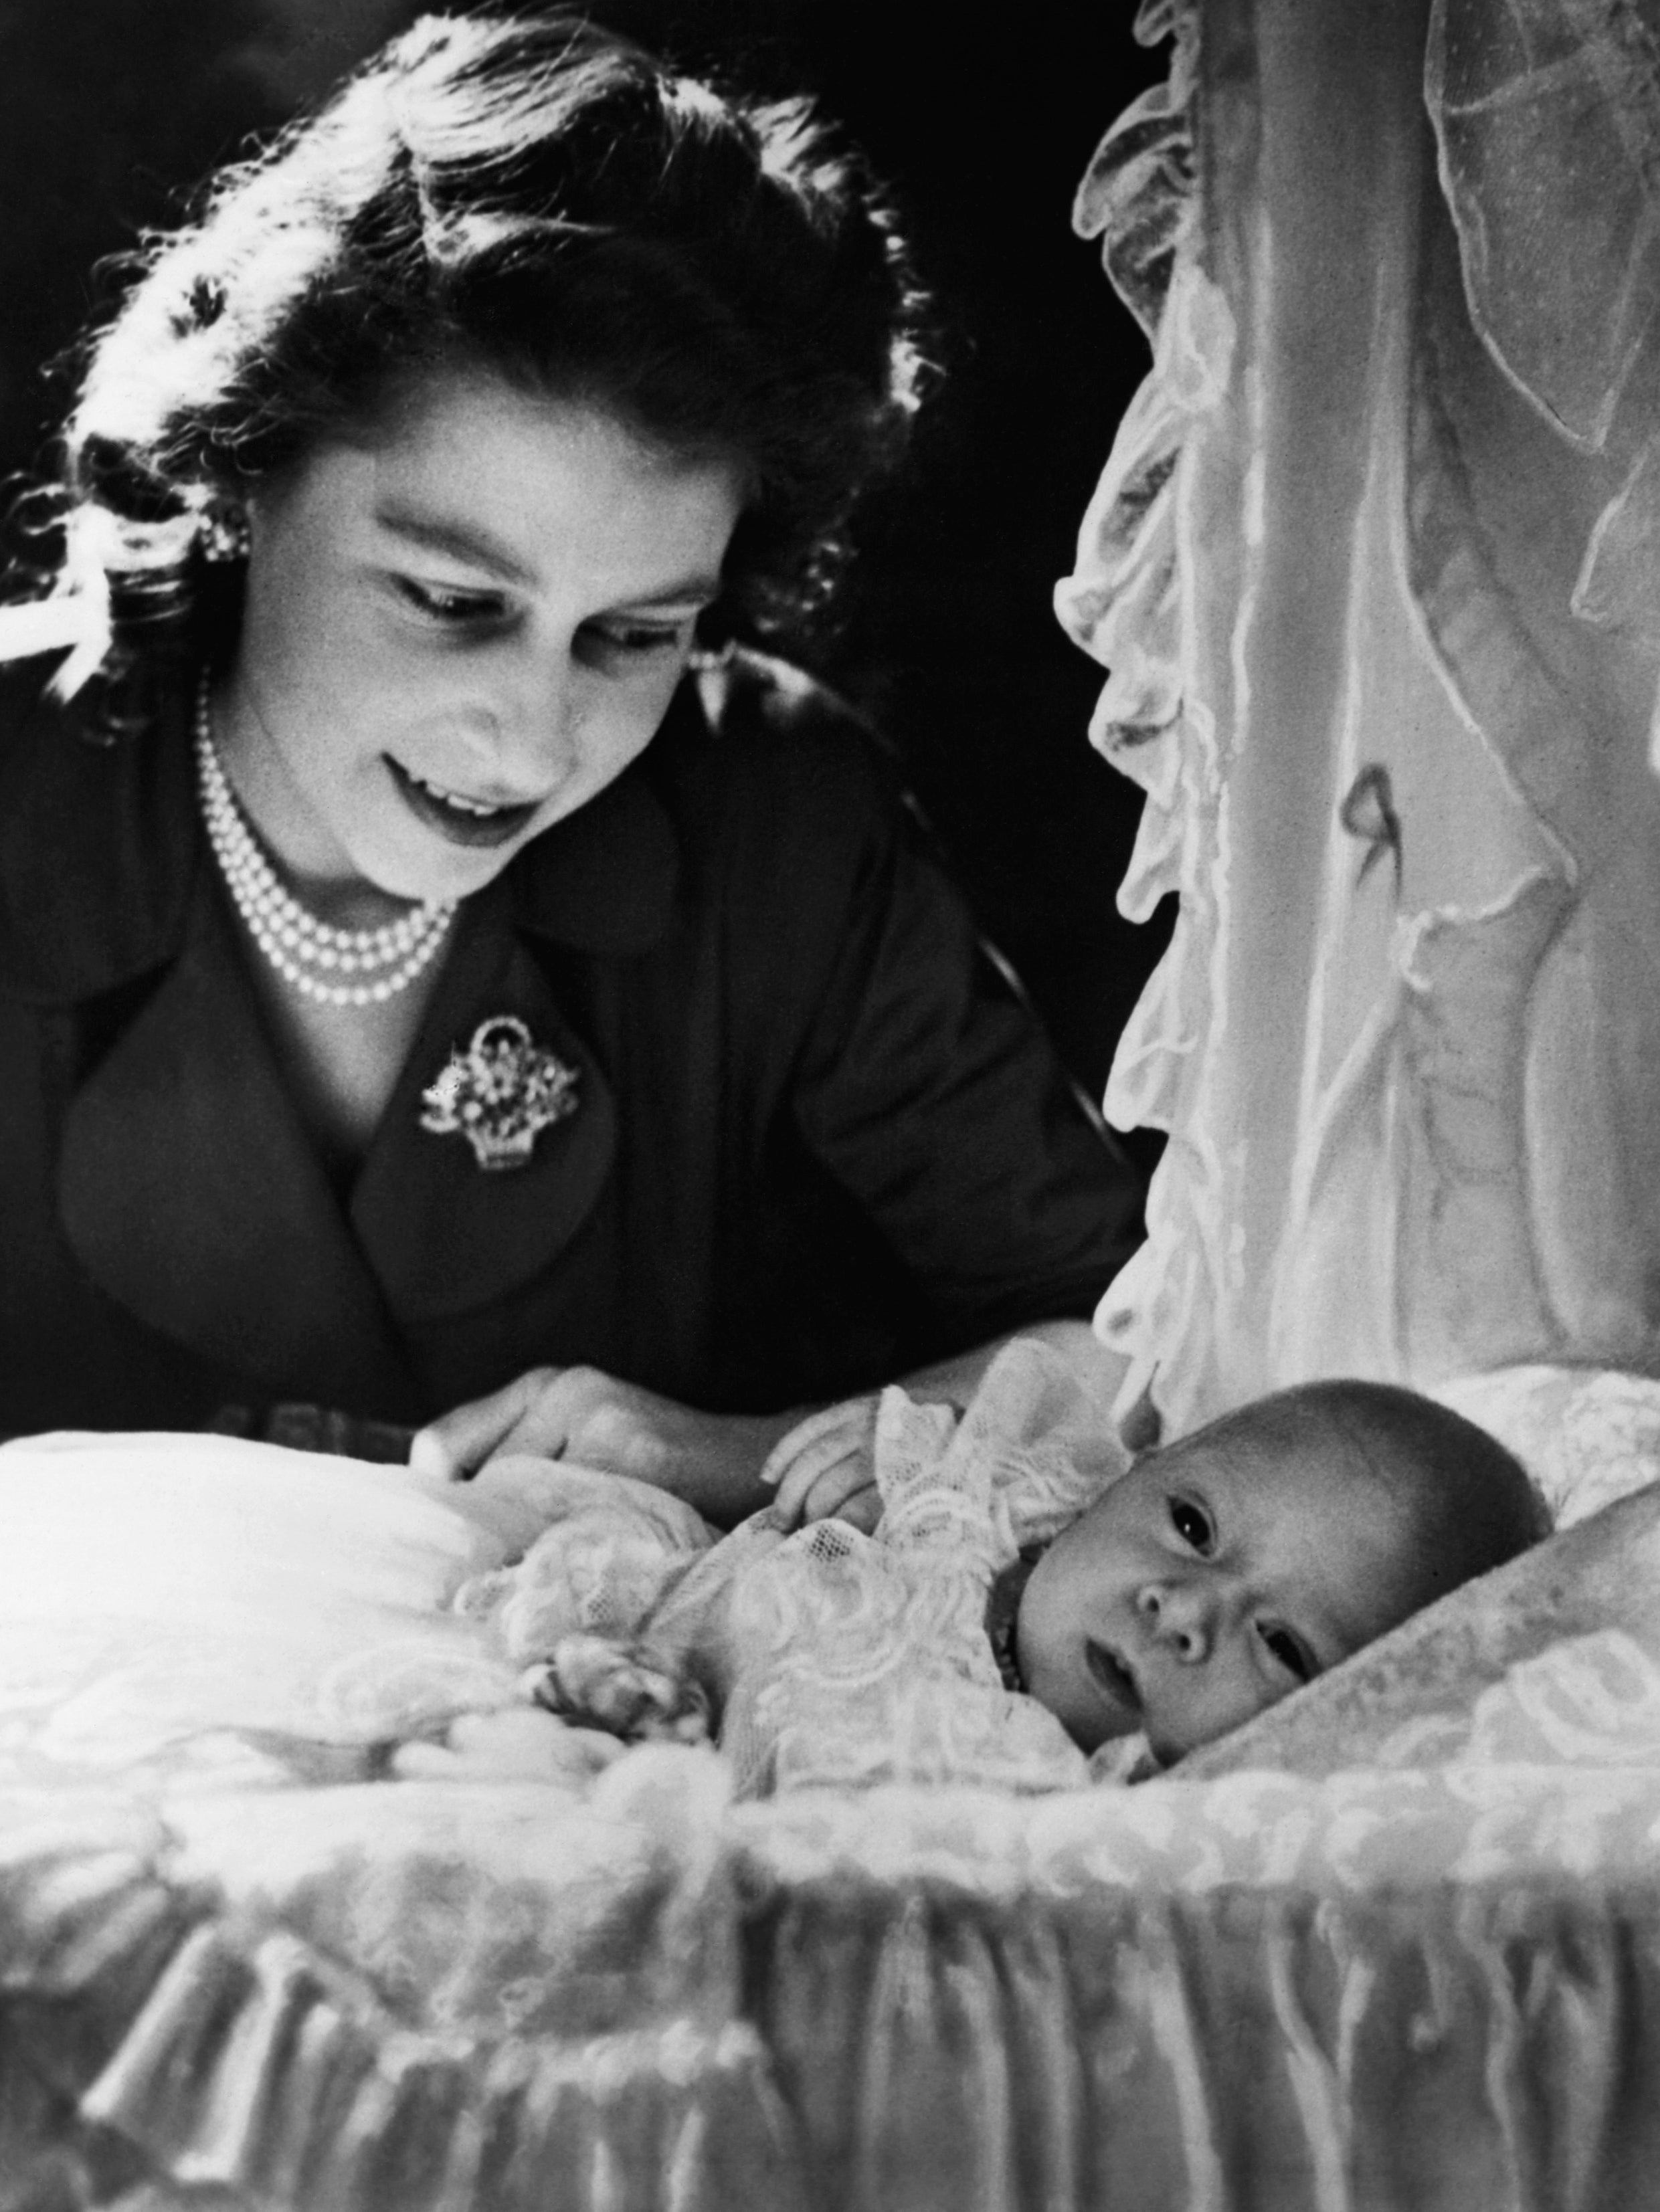 Elizabeth smiles at her first child, a month-old Prince Charles who was born on 14 November 1948